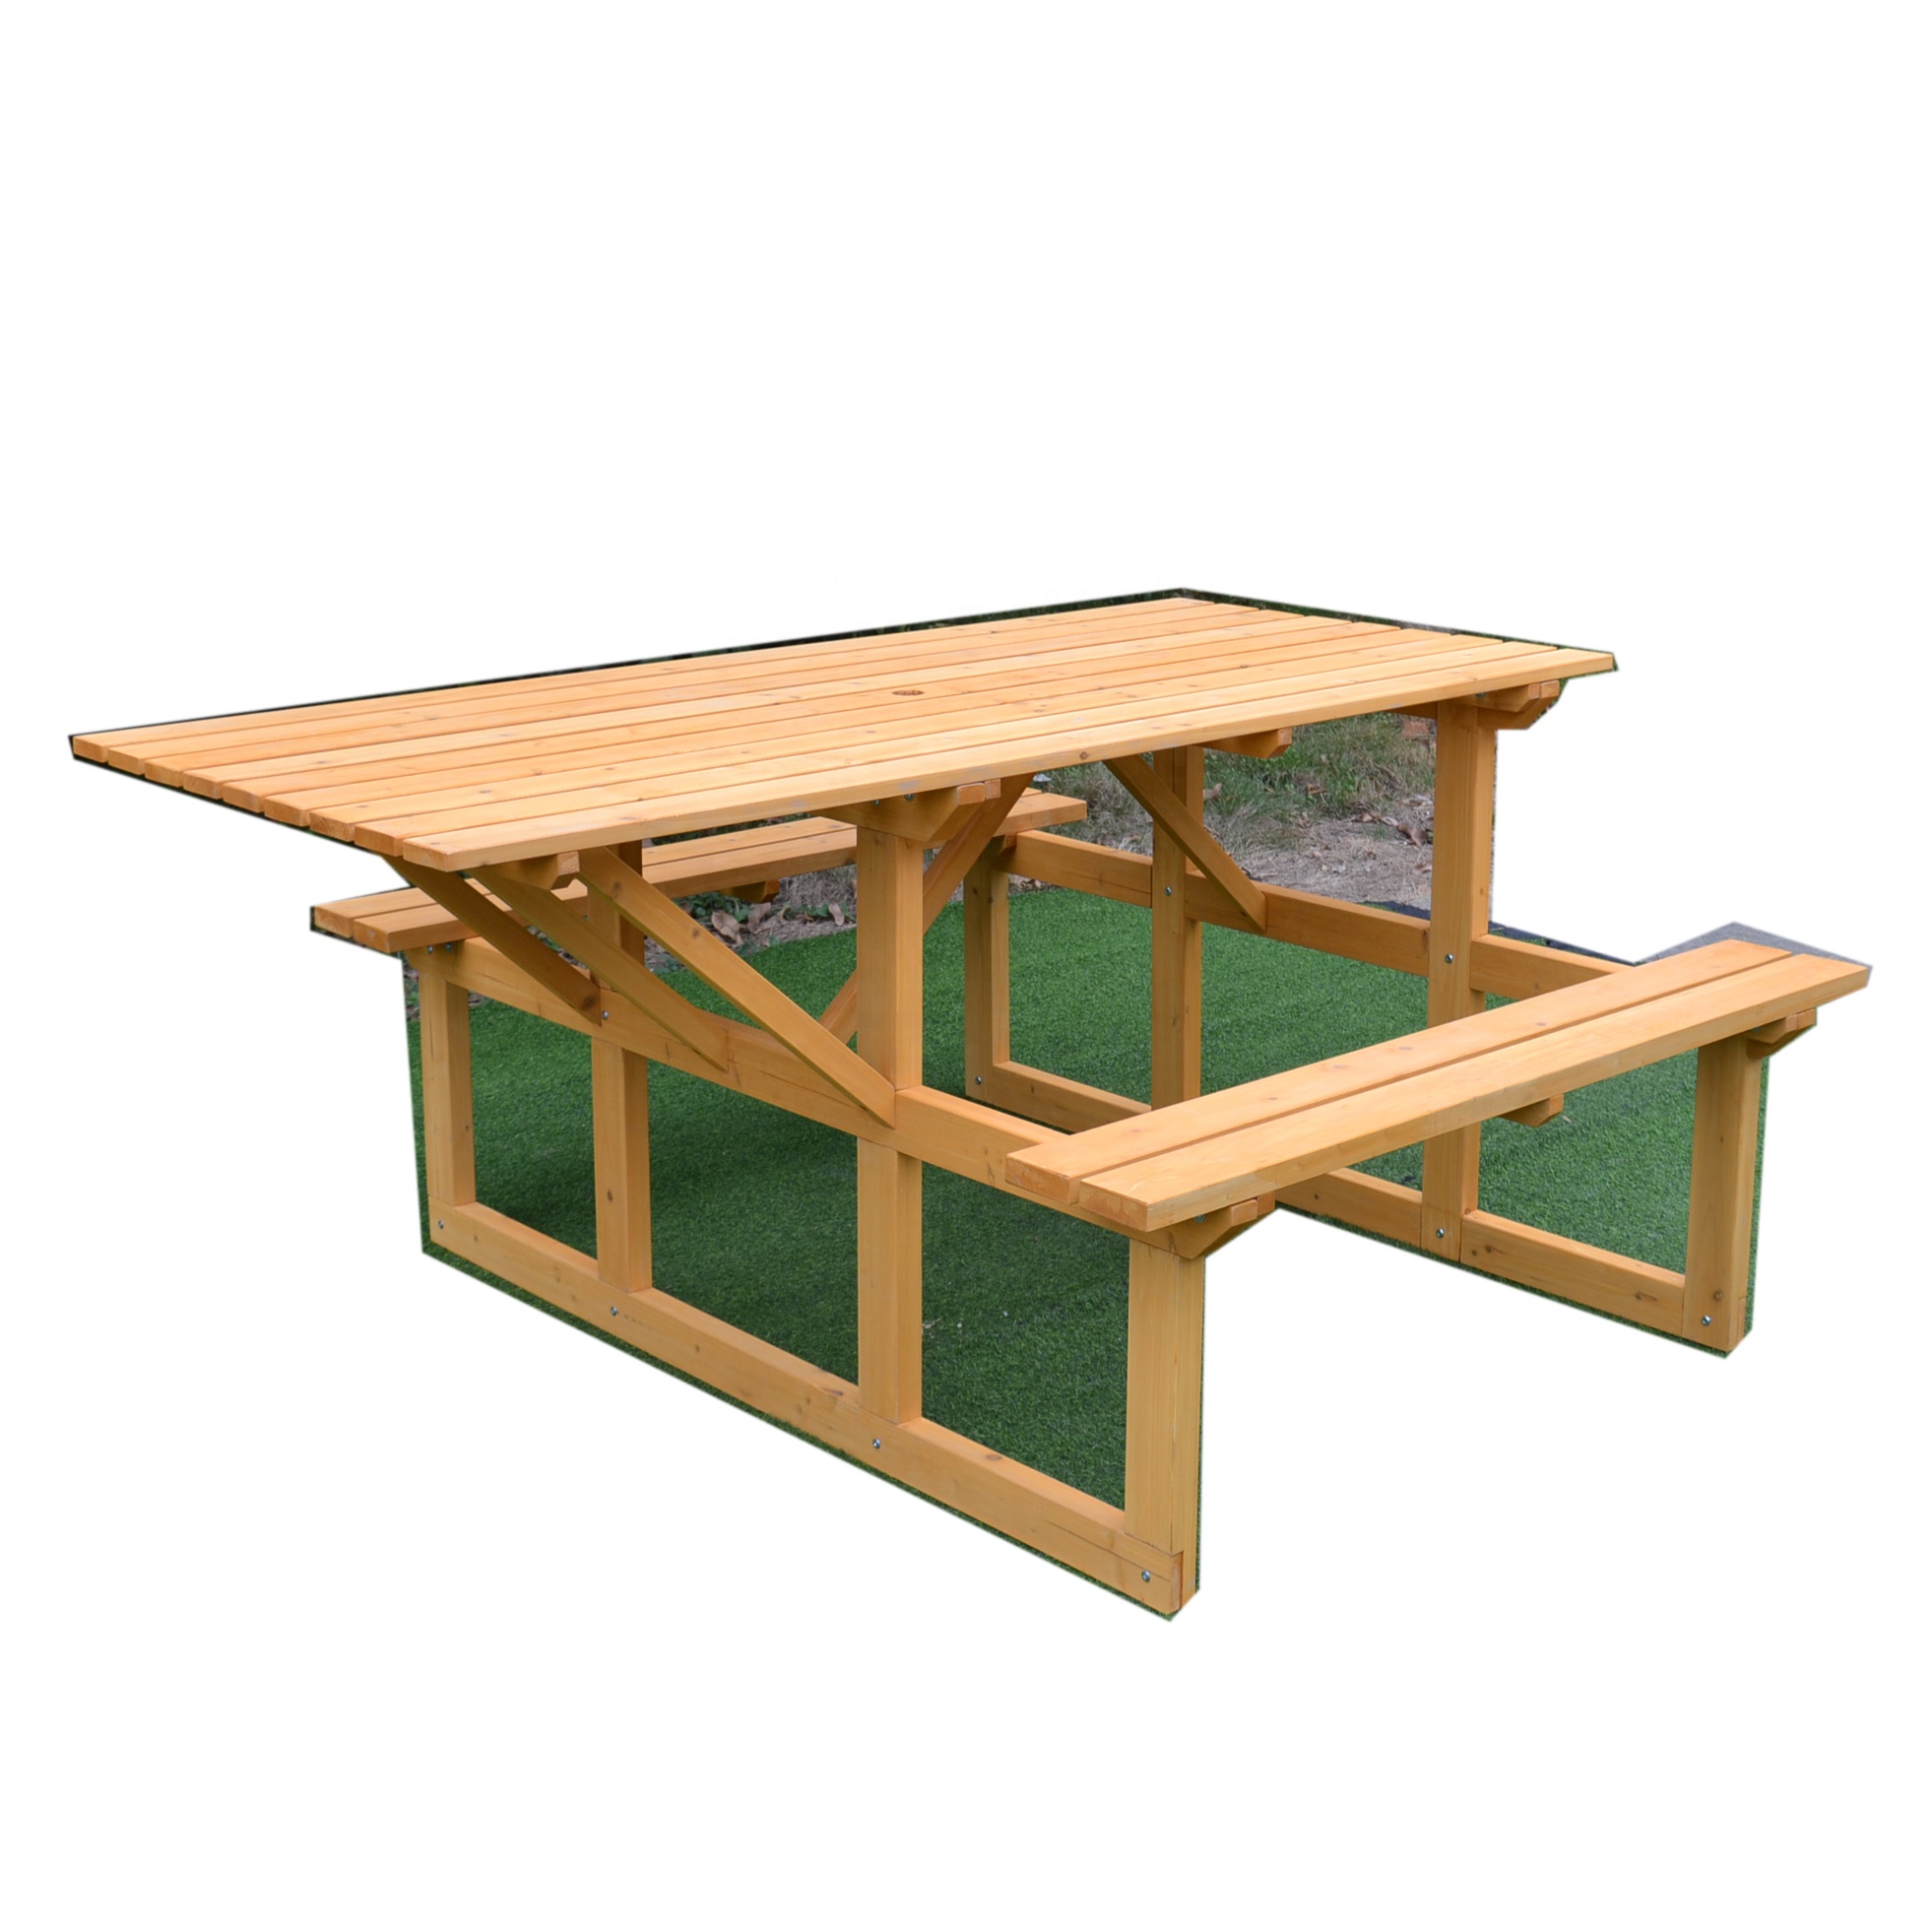 Hot Sale Wood Simple Design simple beer Garden Furniture Table Chair bench